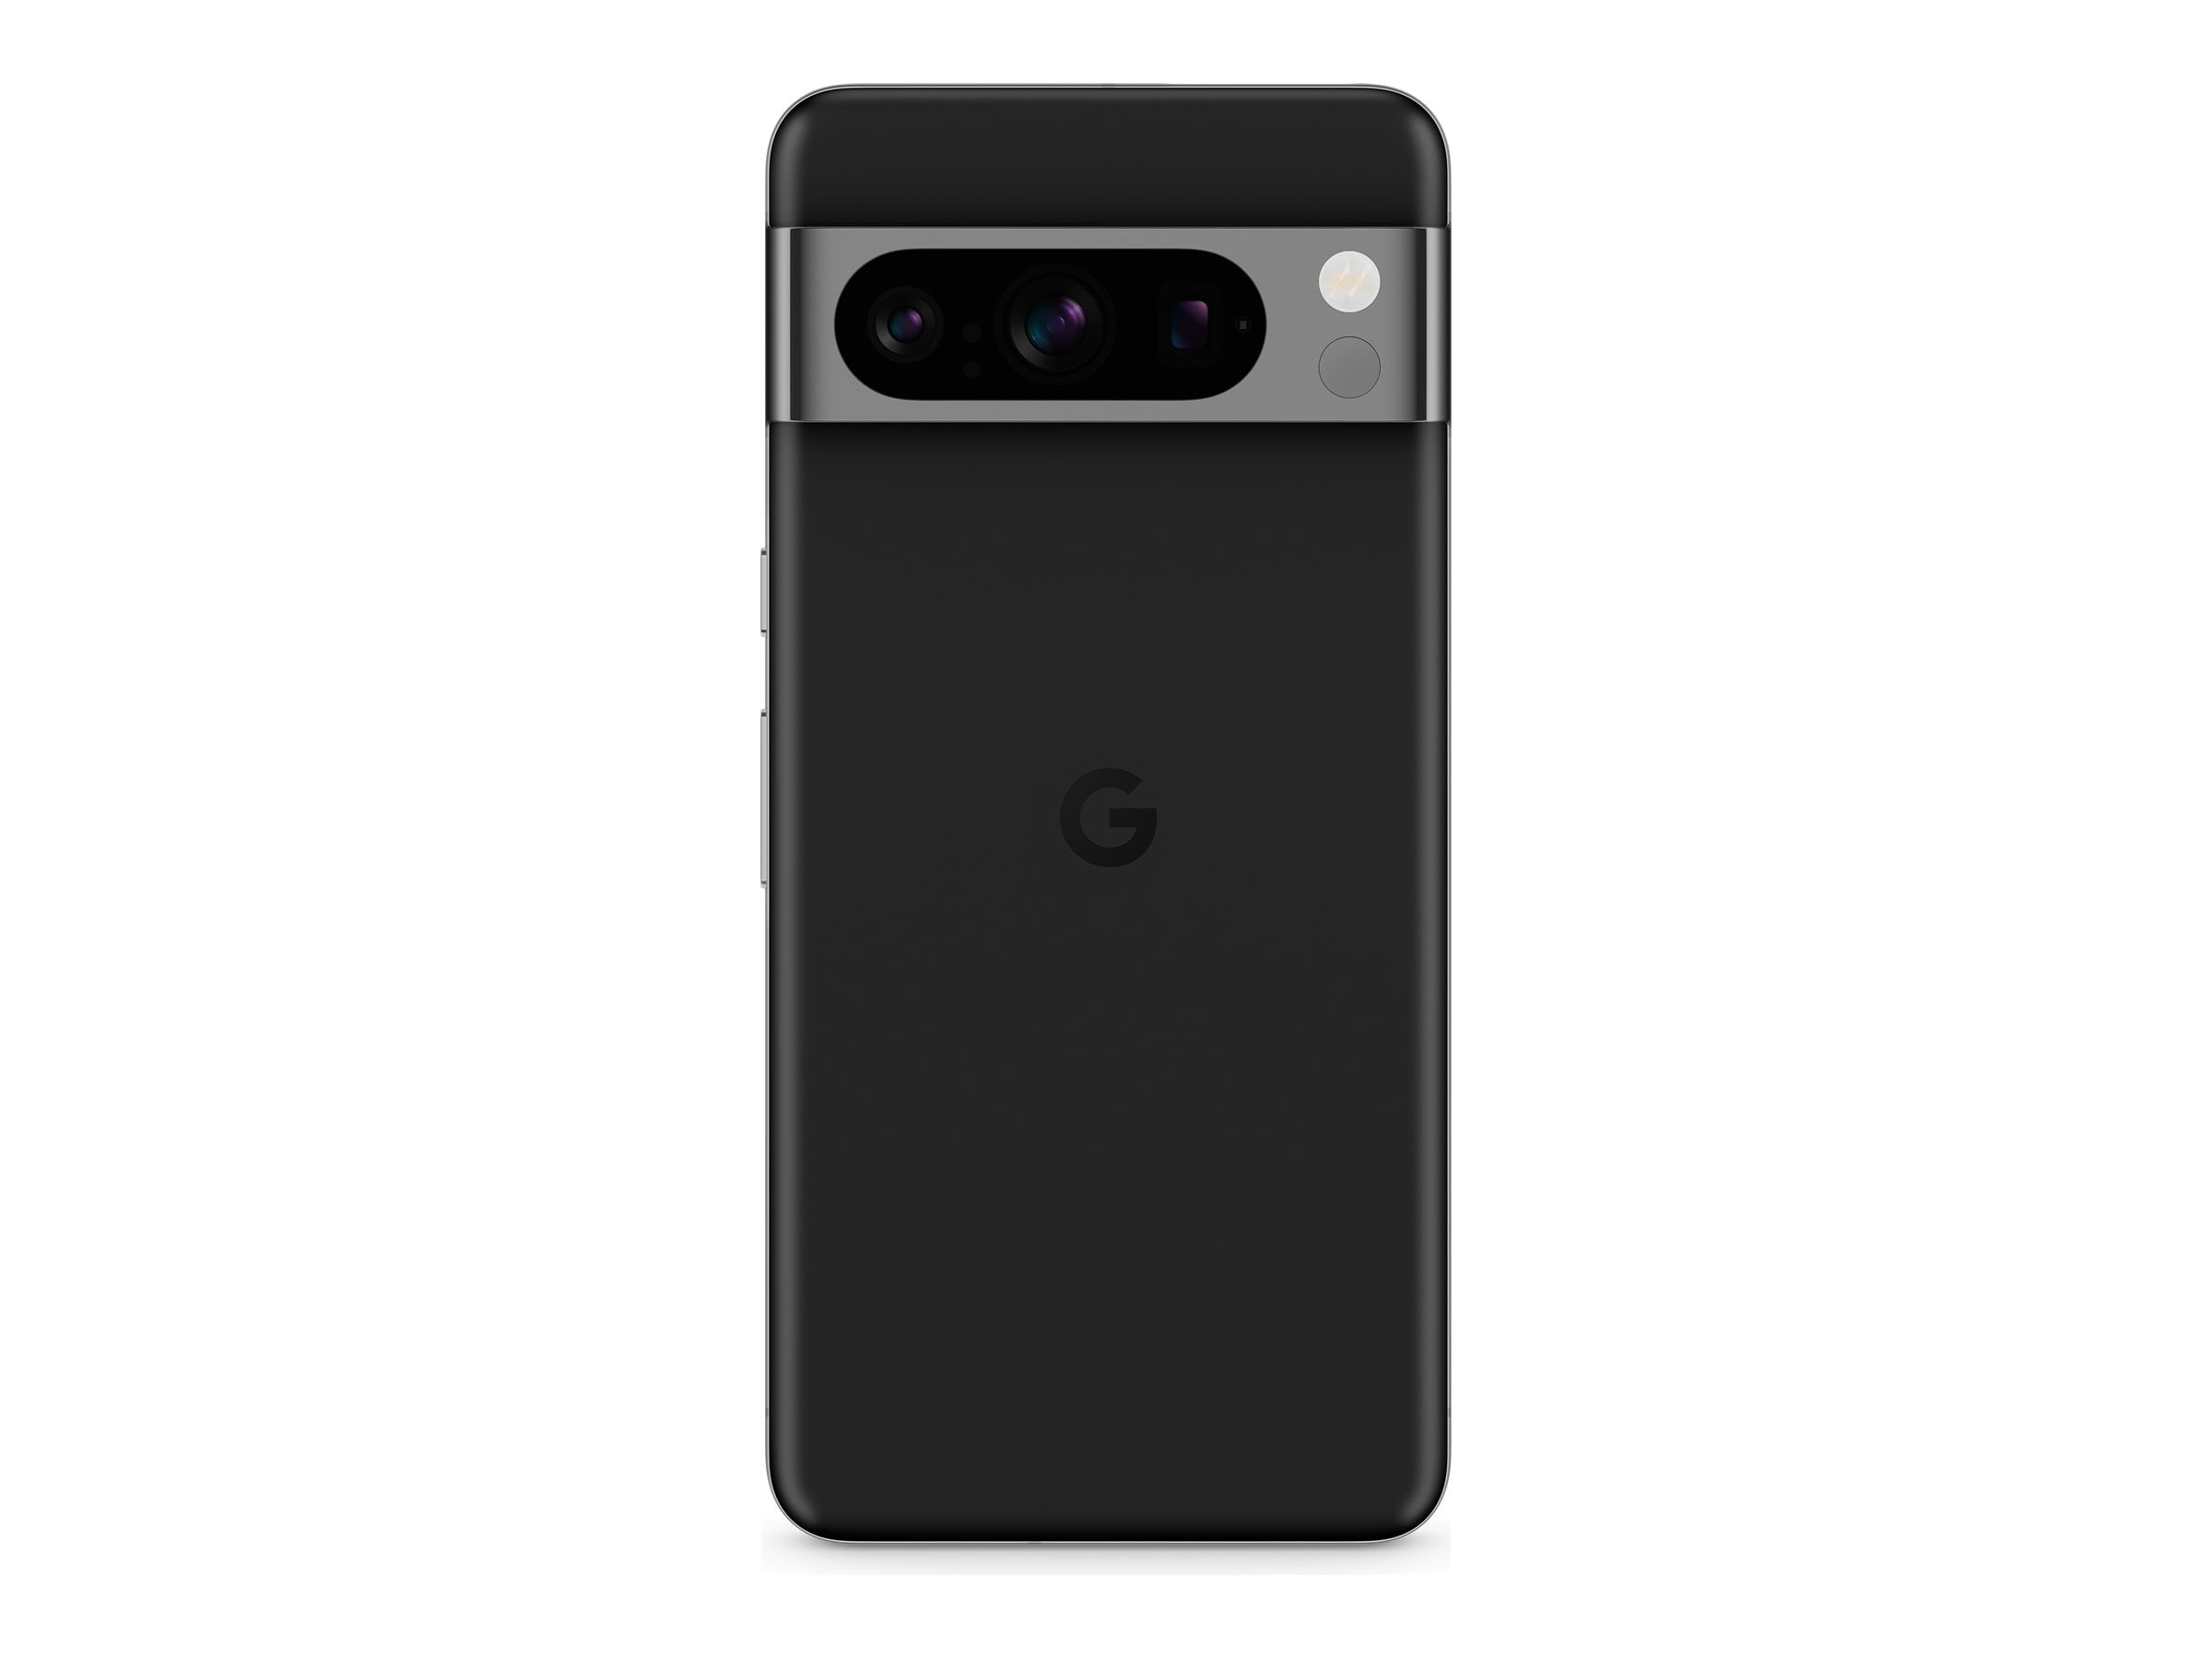 GB Google - Display Super Pro Pixel Lens Unlocked Actua Android - Telephoto with Smartphone 8 Obsidian 128 and - 24-Hour - Battery